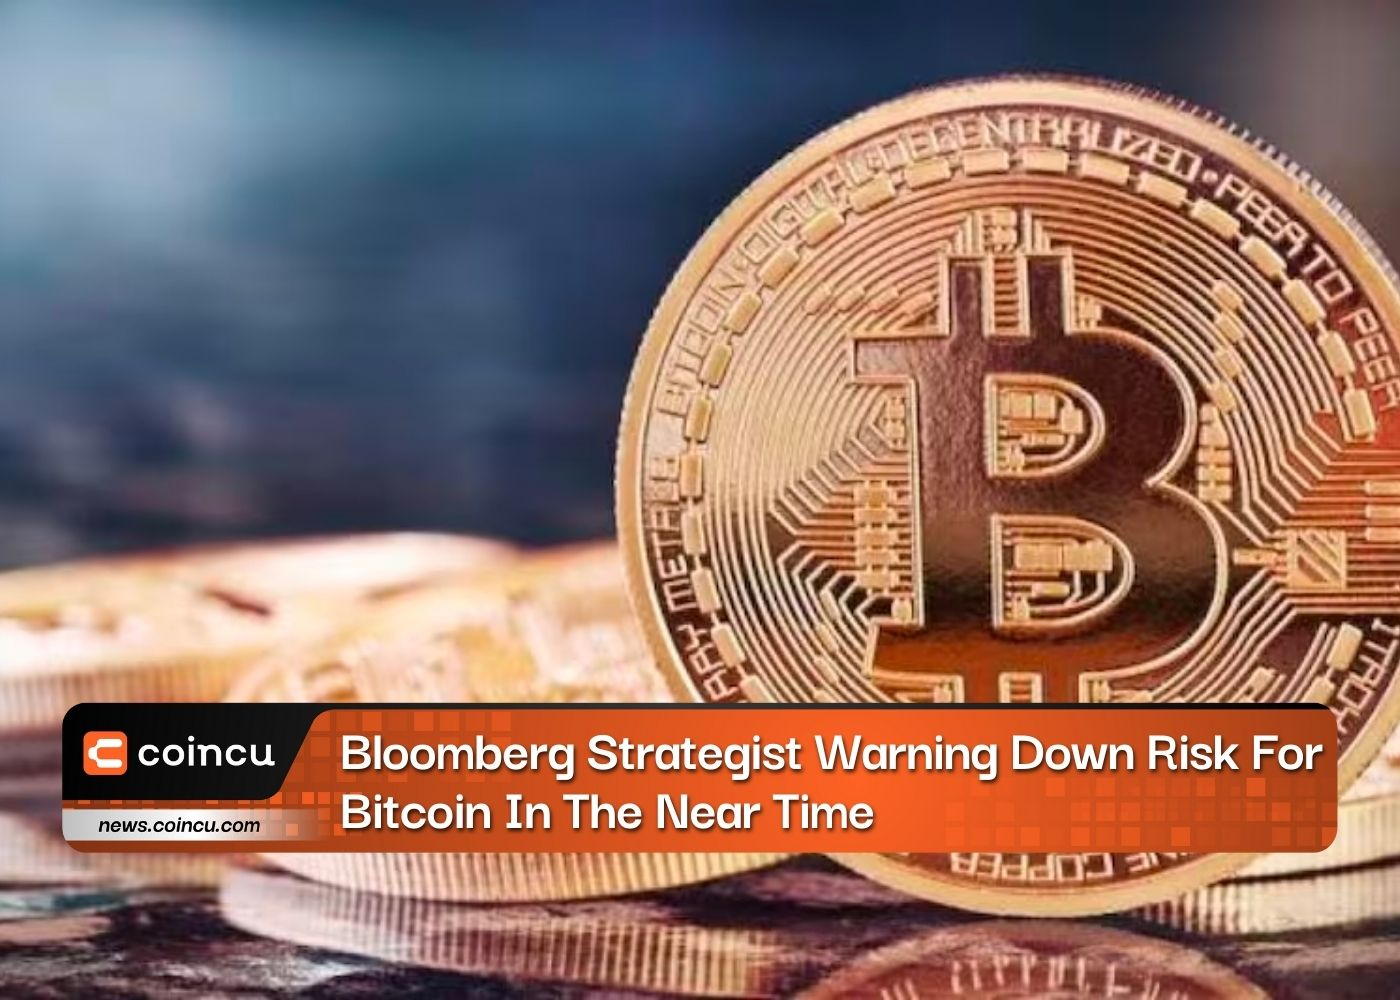 Bloomberg Strategist Warning Down Risk For Bitcoin In The Near Time